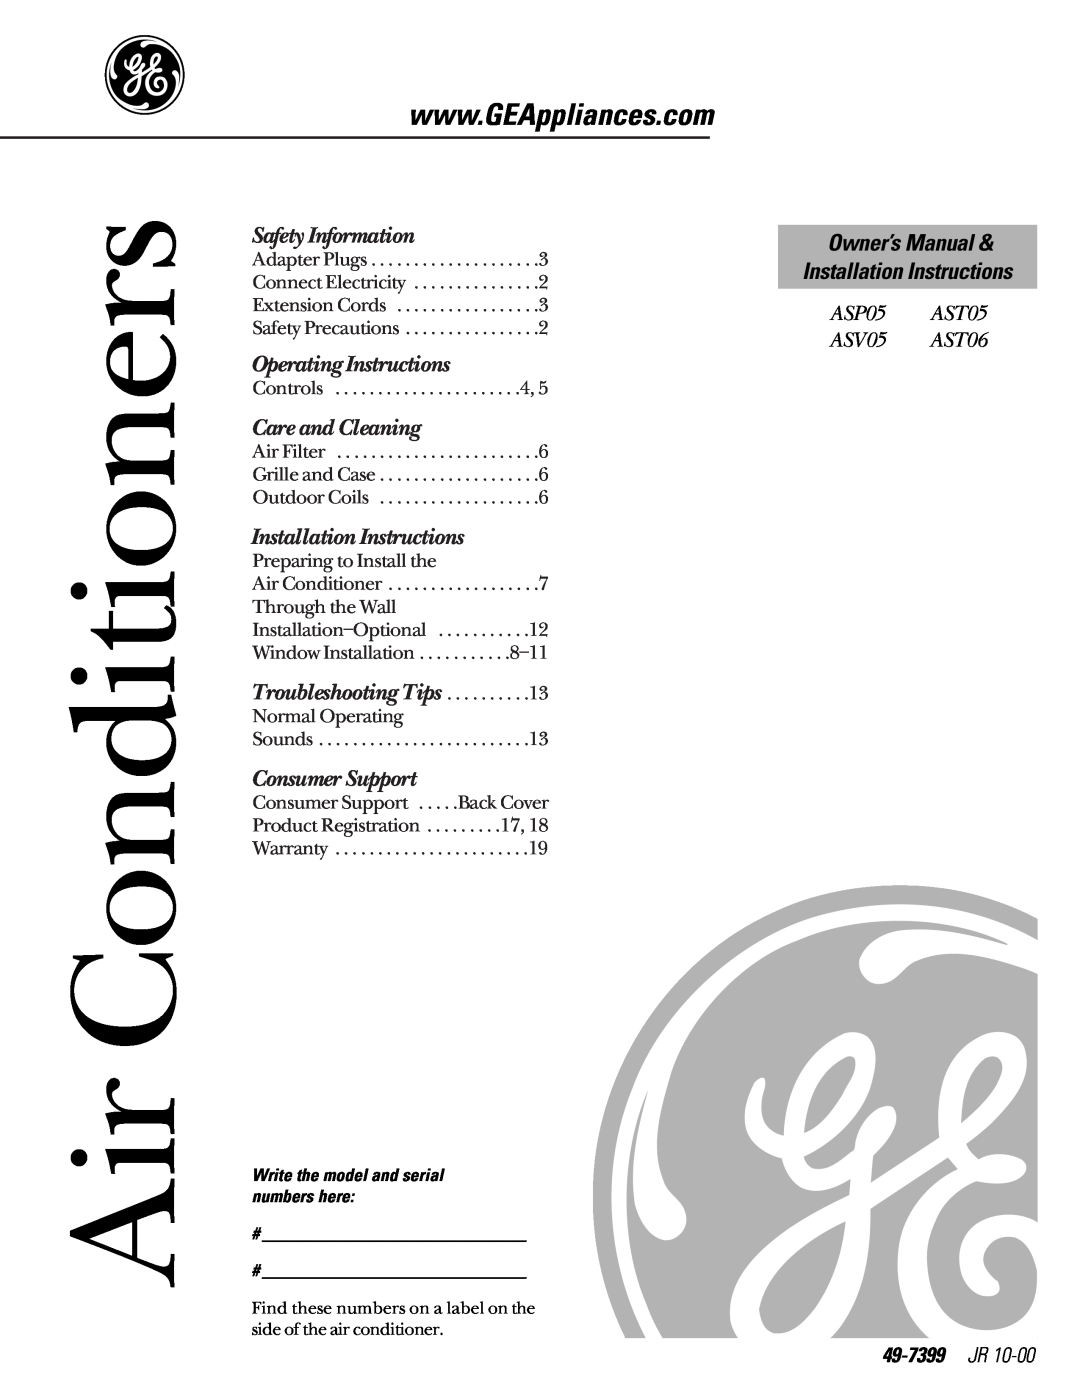 GE ASP05 owner manual 49-7420-1 11-01JR, Air Conditioners, Operating Instructions, Care and Cleaning, Troubleshooting Tips 